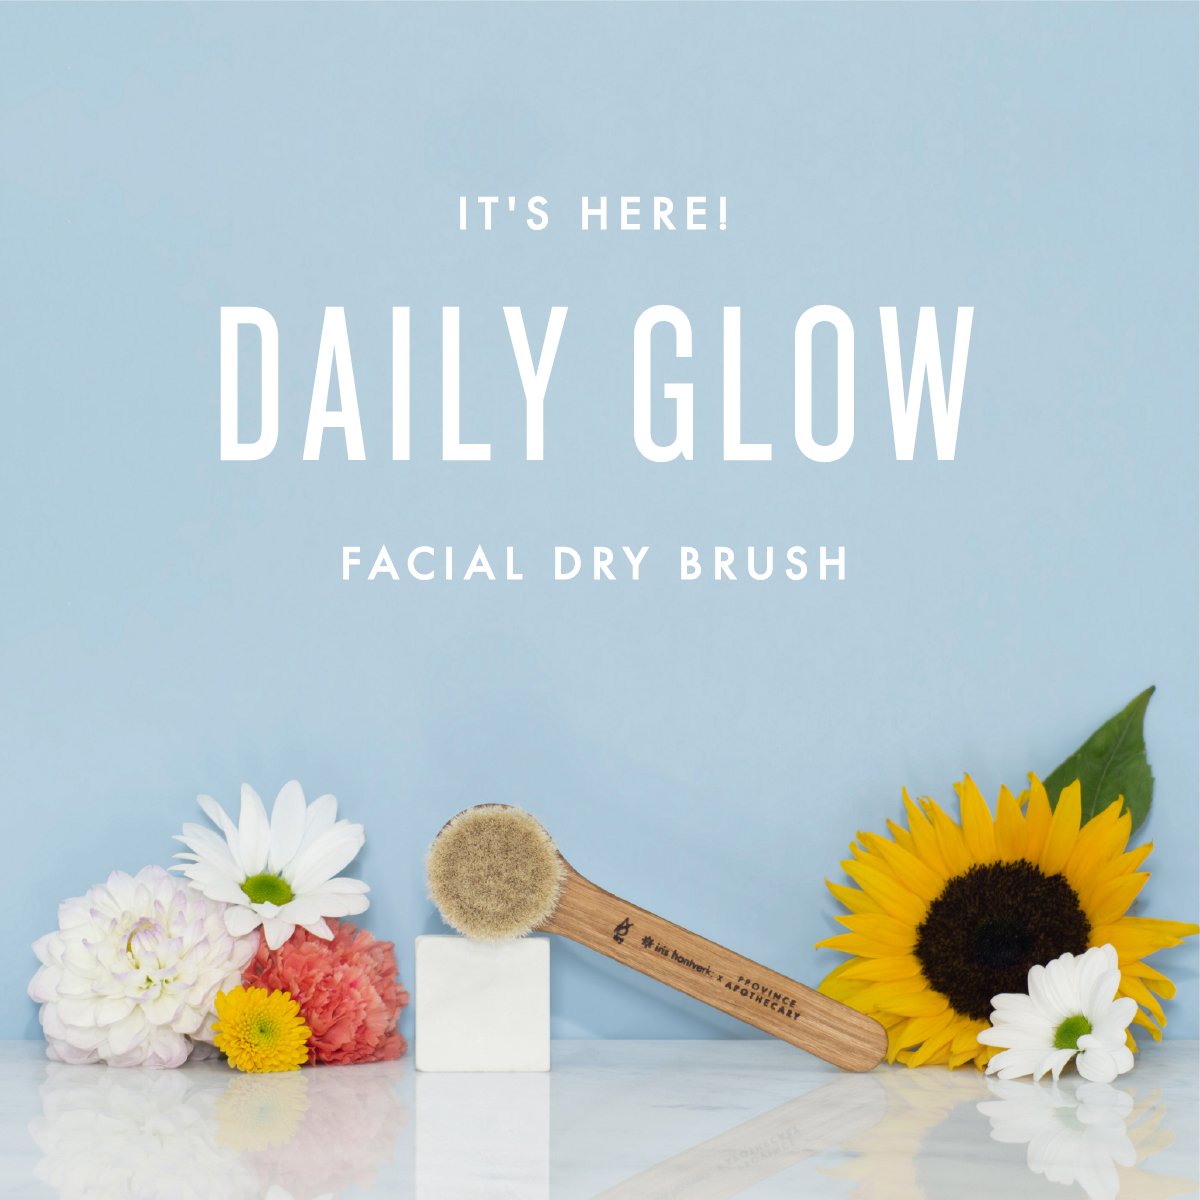 Introducing our NEW Daily Glow Facial Dry Brush